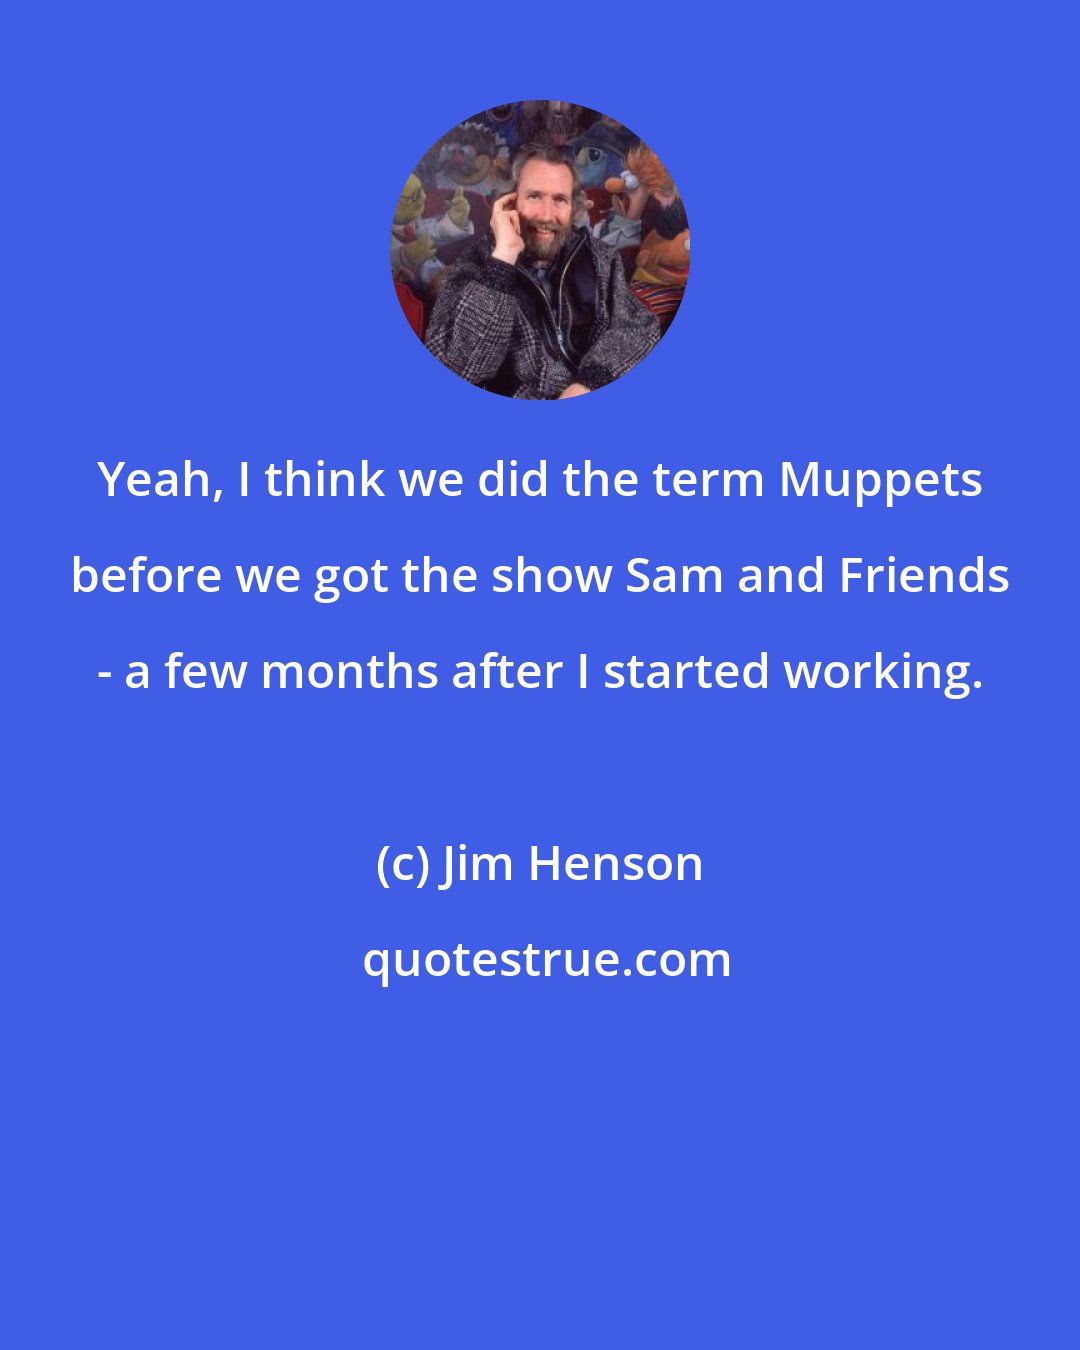 Jim Henson: Yeah, I think we did the term Muppets before we got the show Sam and Friends - a few months after I started working.